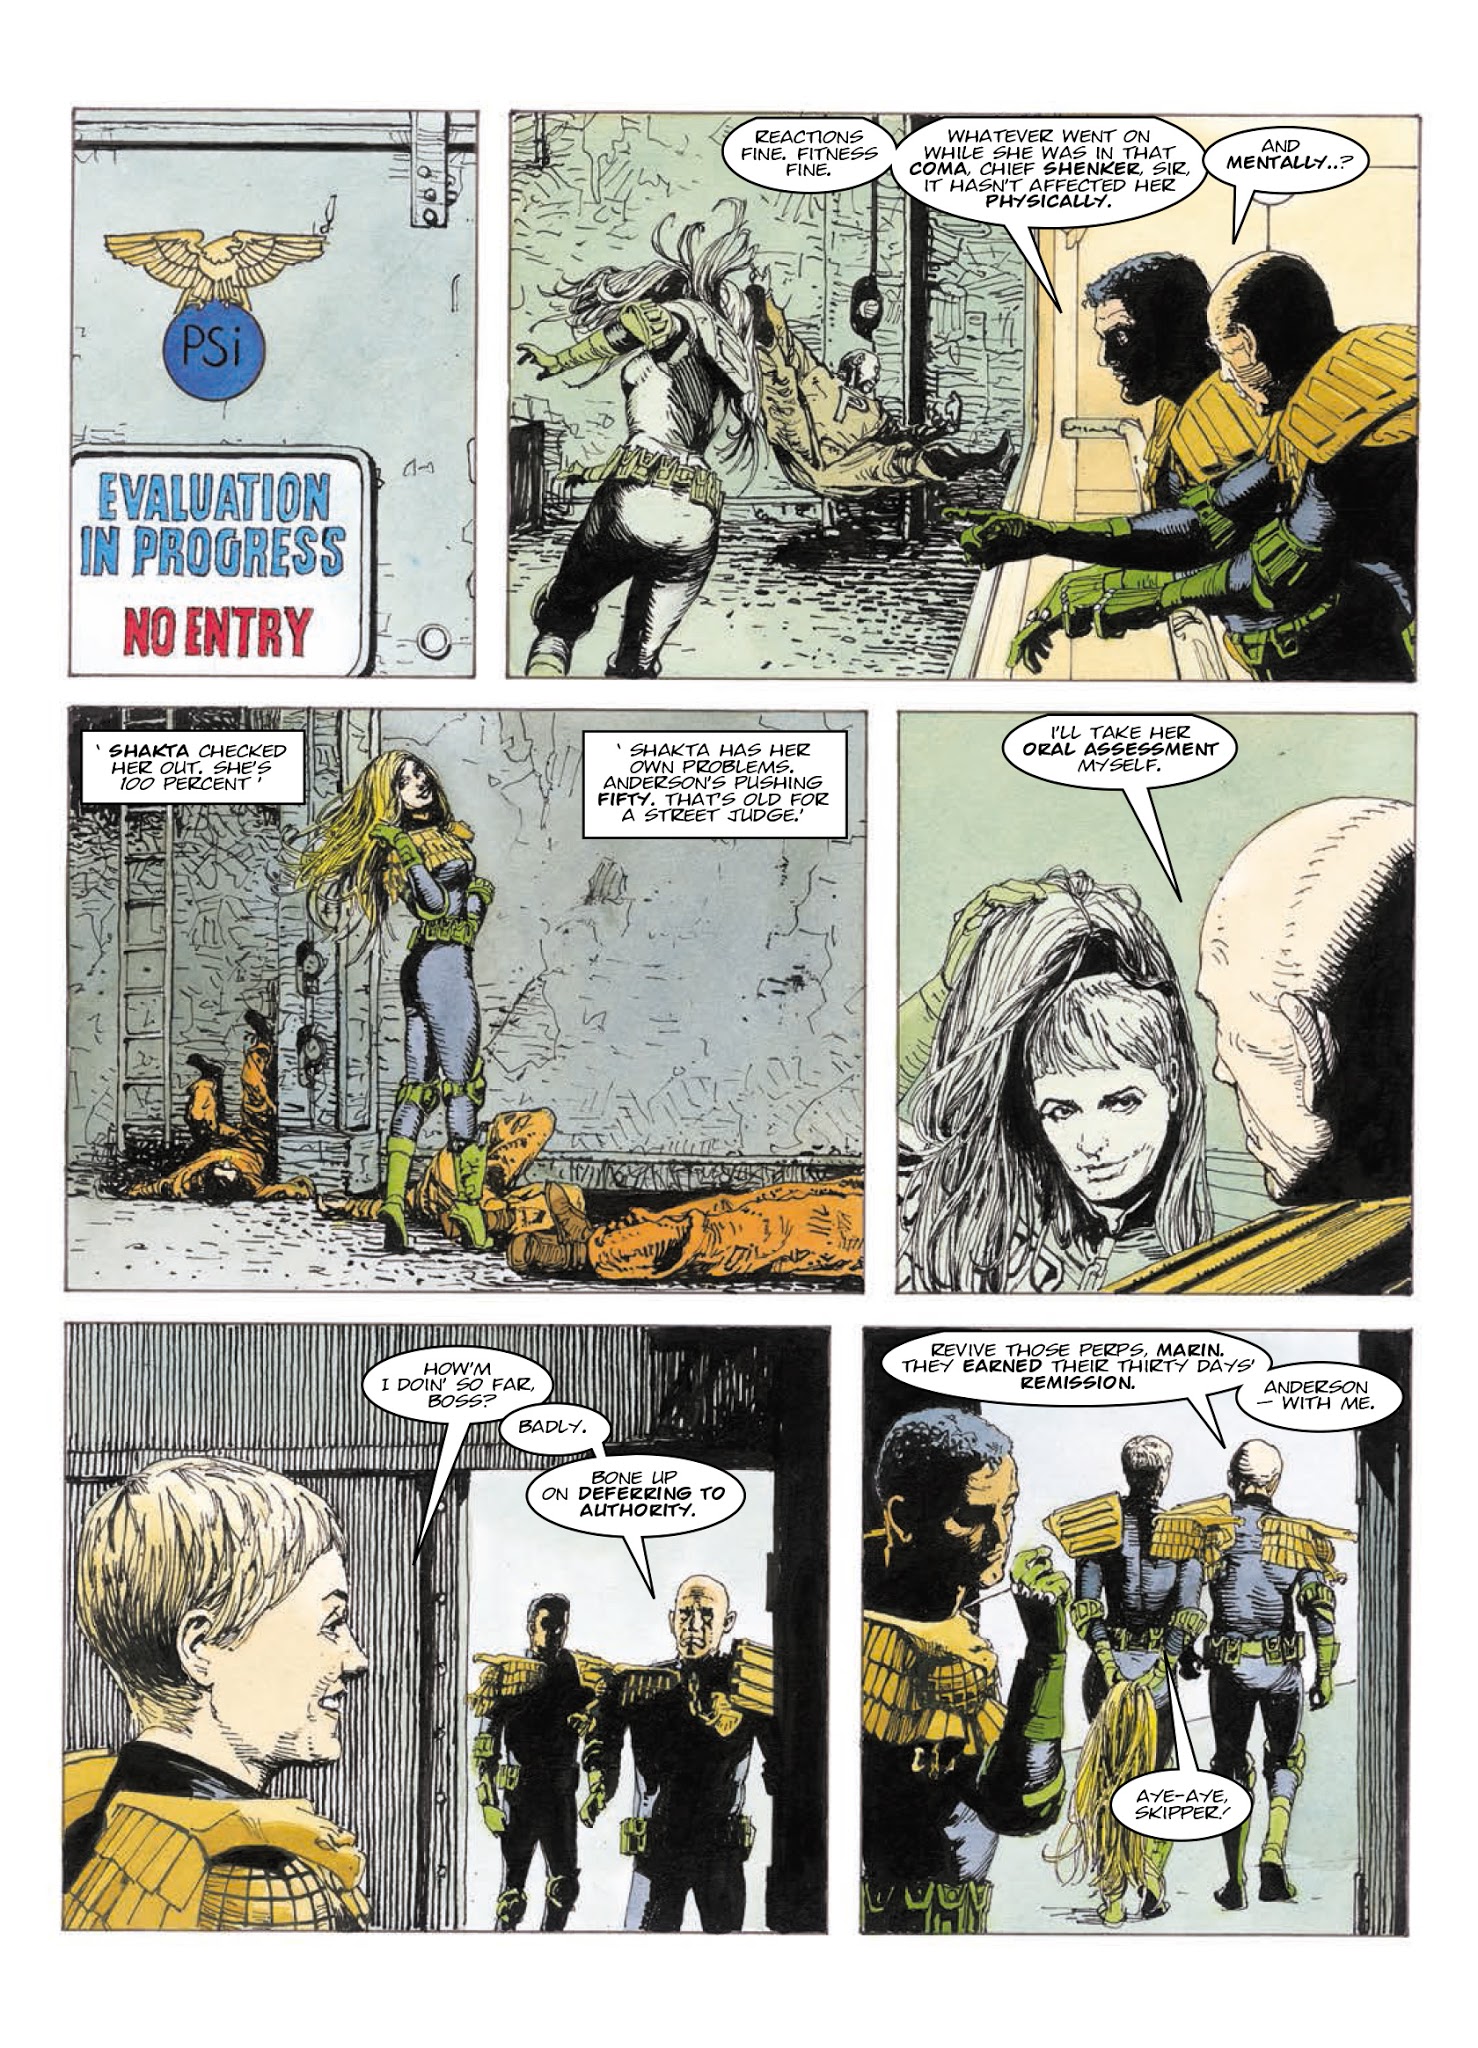 Read online Judge Anderson: The Psi Files comic -  Issue # TPB 4 - 187